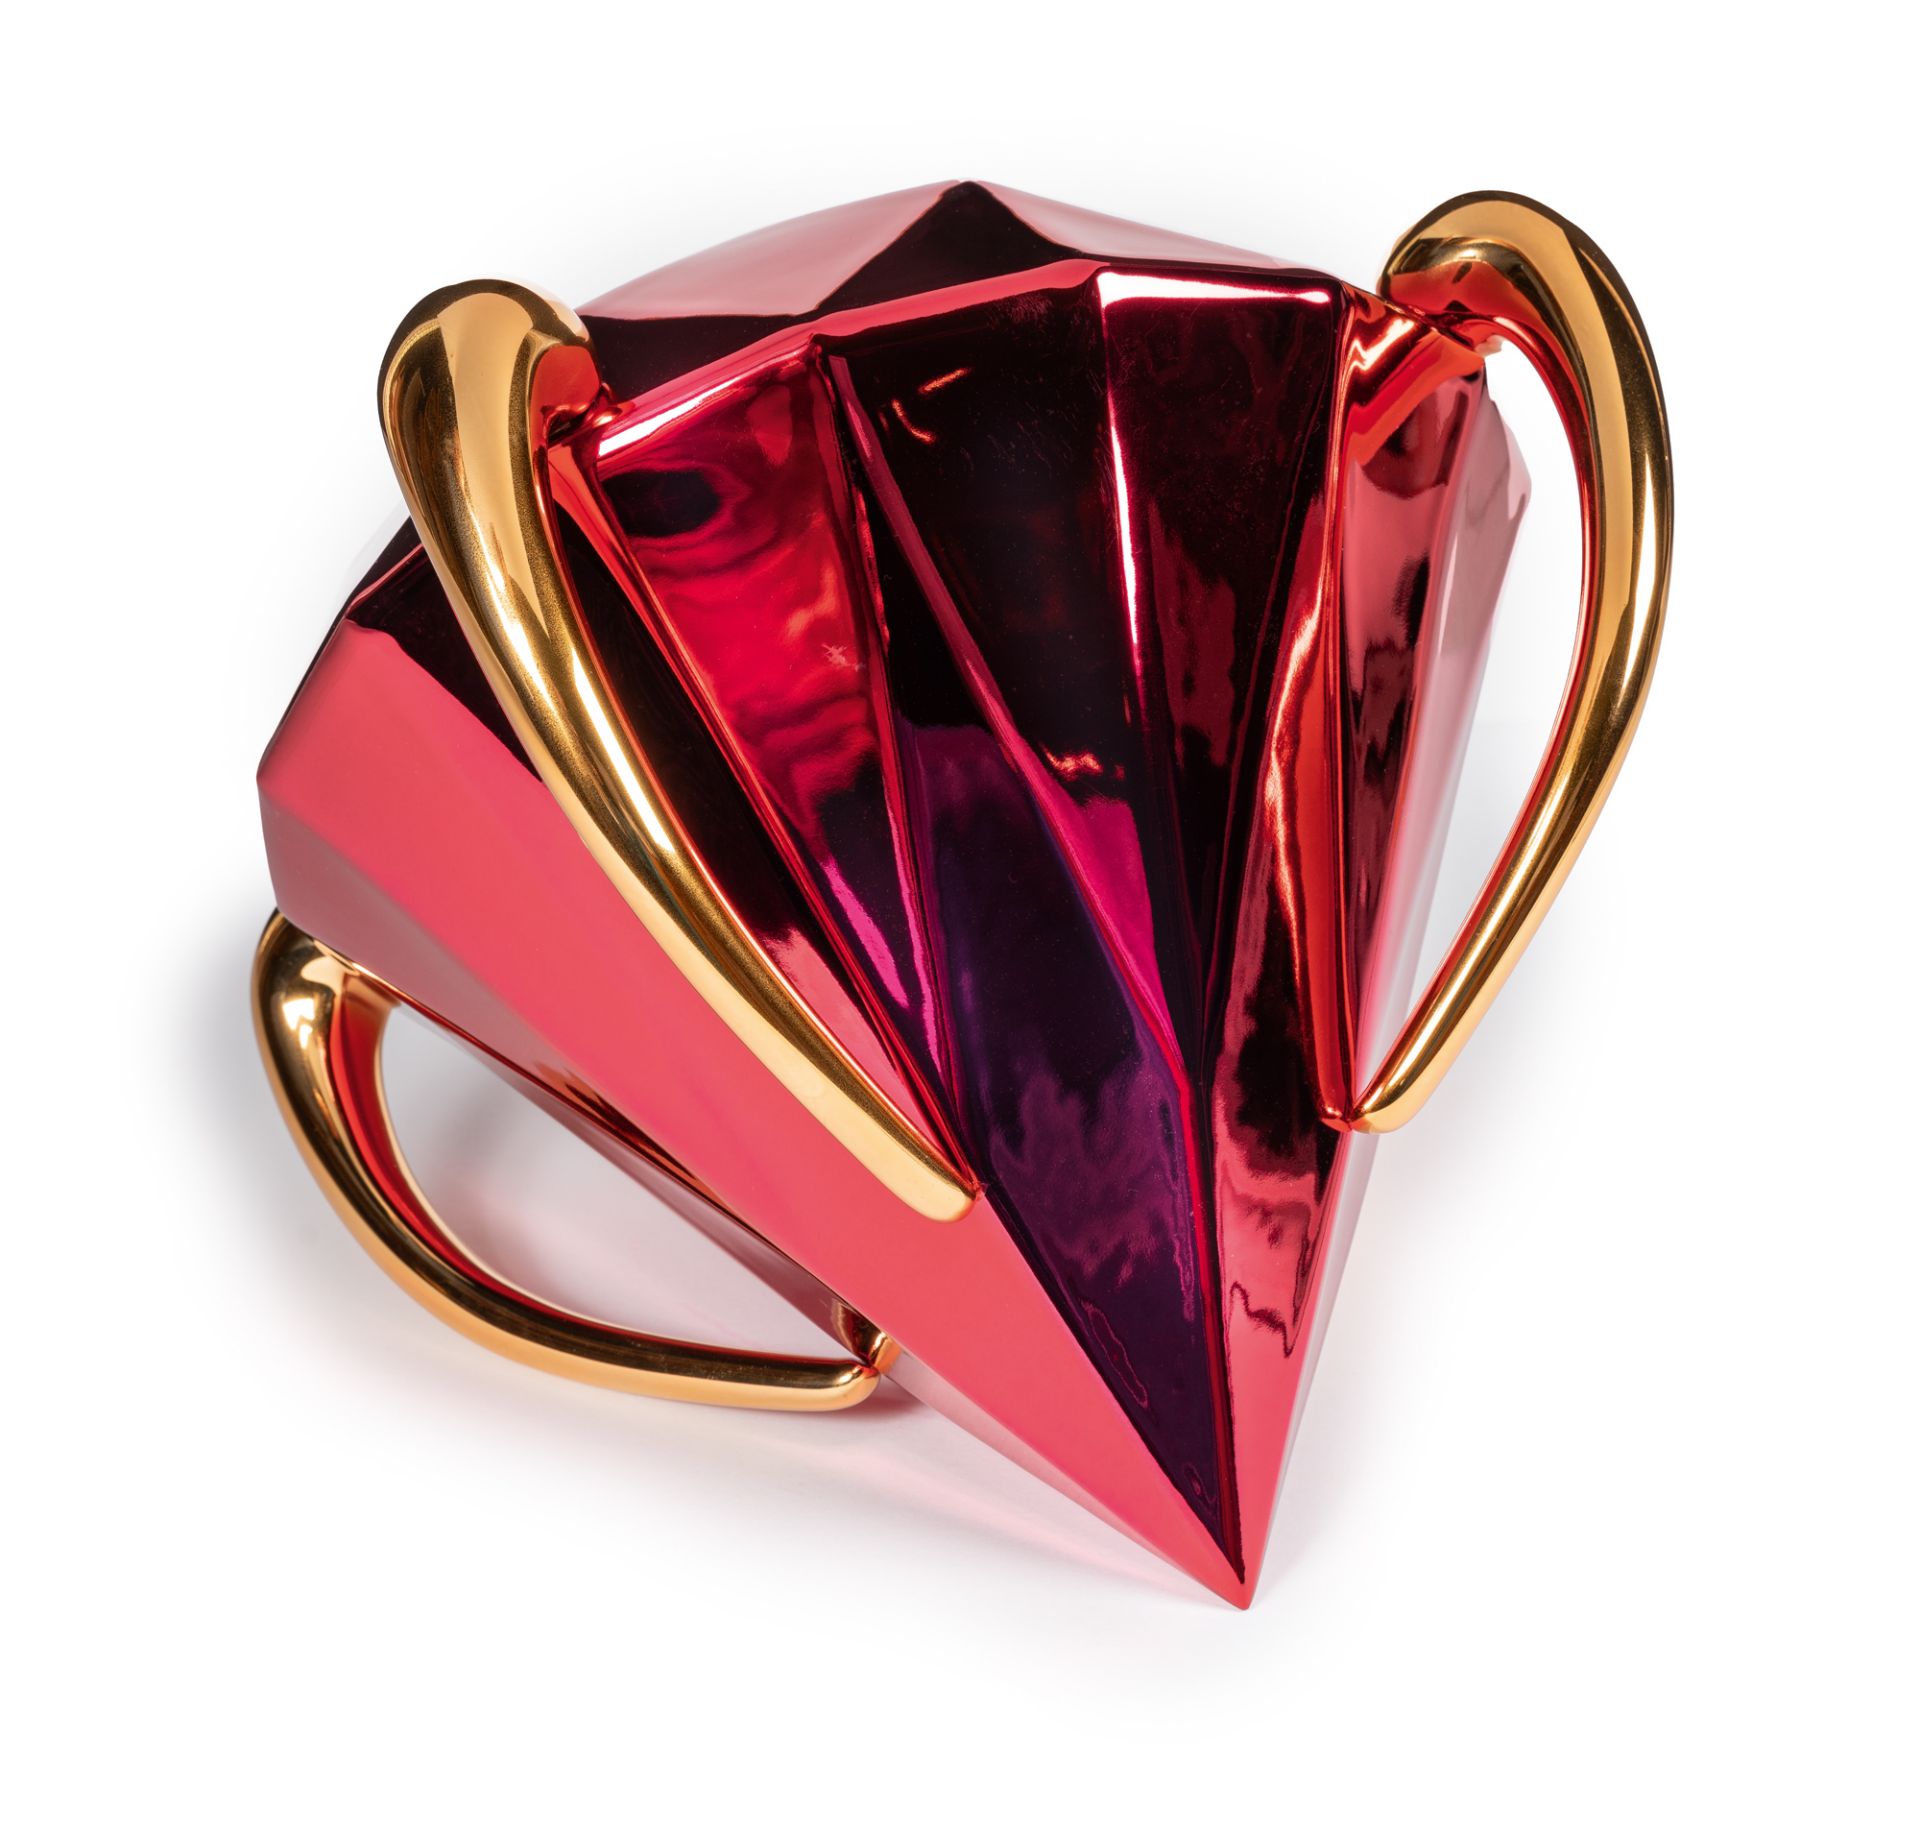 Jeff Koons, Diamond (red).Porcelain with chromatic coating. (2020). Ca. 32.5 x 39 x 32 cm. A - Image 2 of 6